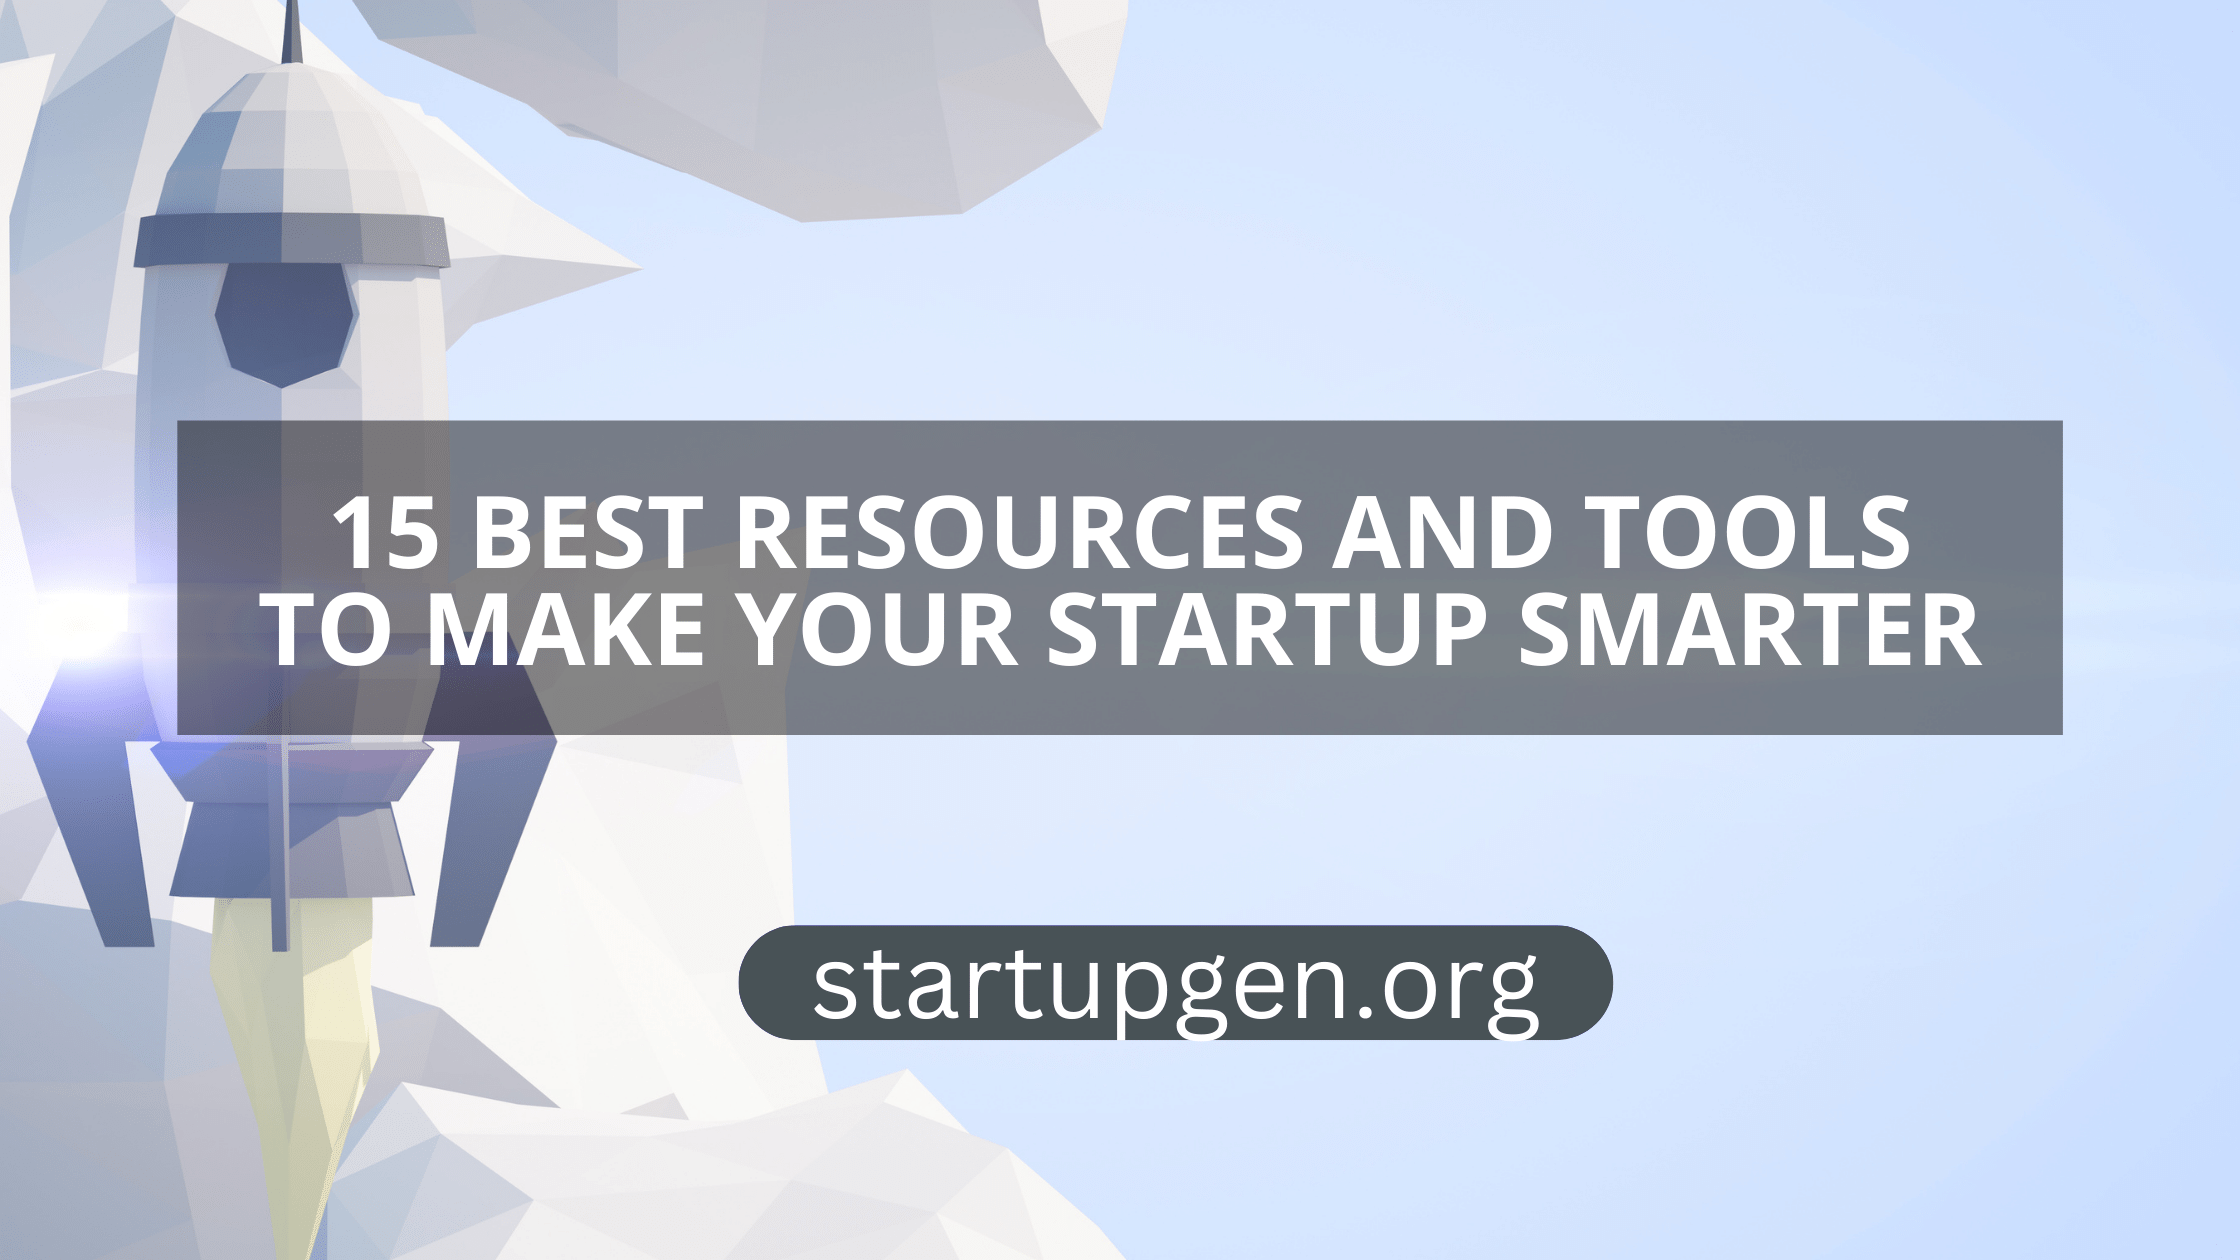 15 Best Smart Resources And Tools For Startups